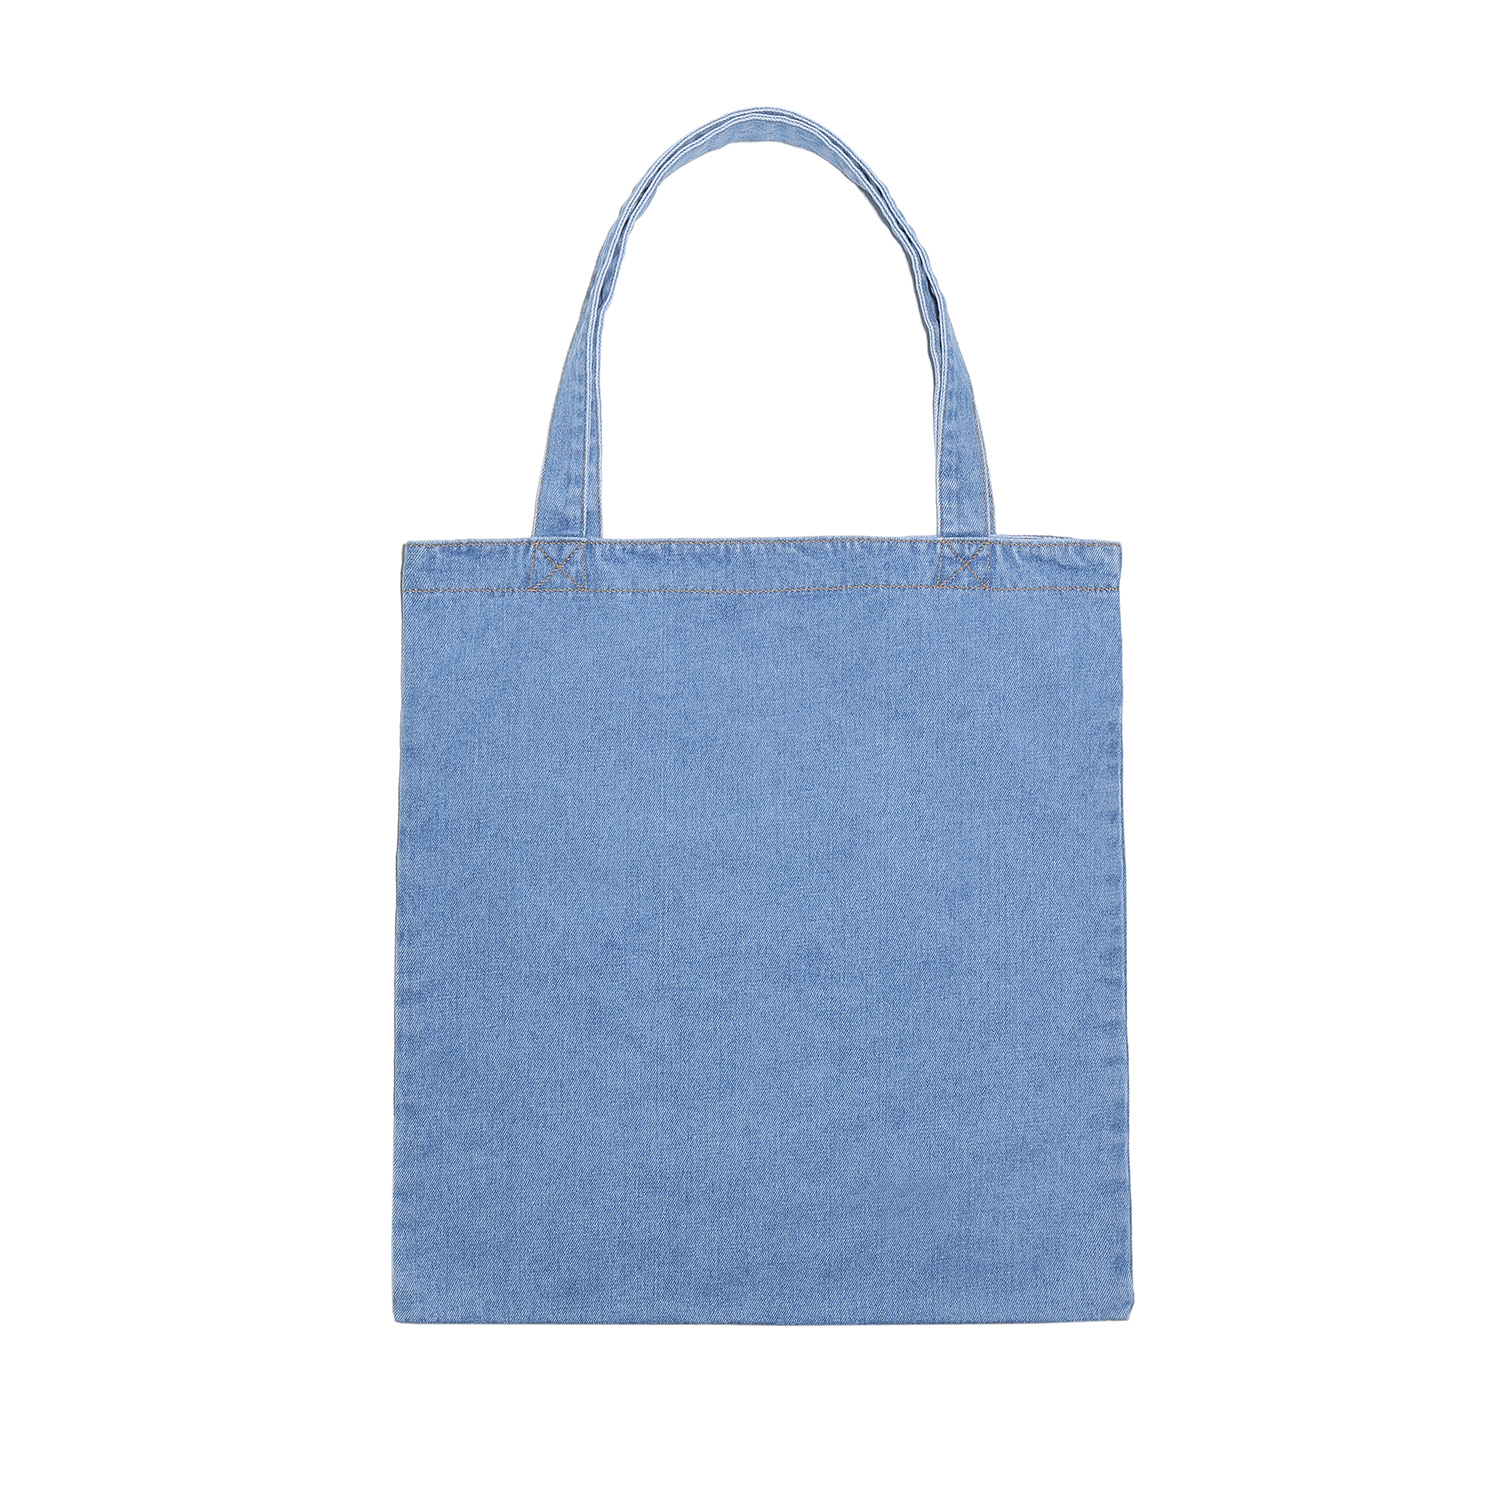 Custom Streetwear Denim Tote Bag for Daily Casual and Outdoor Use - Print On Demand